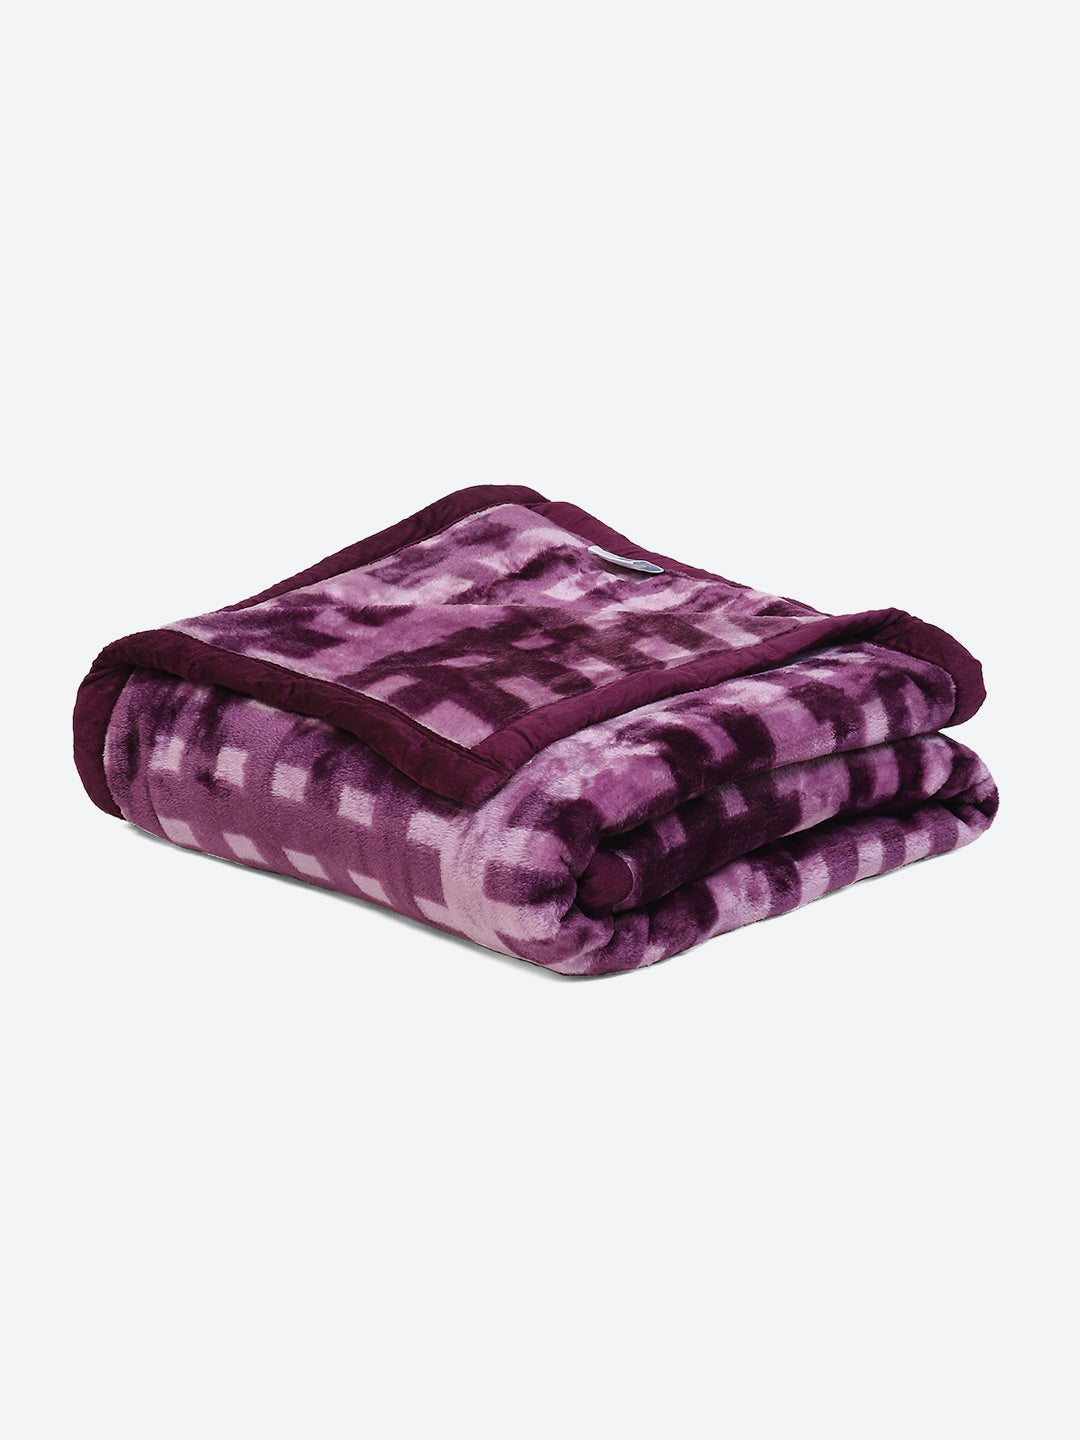 Printed Single Bed Blanket for Mild Winter -1 Ply